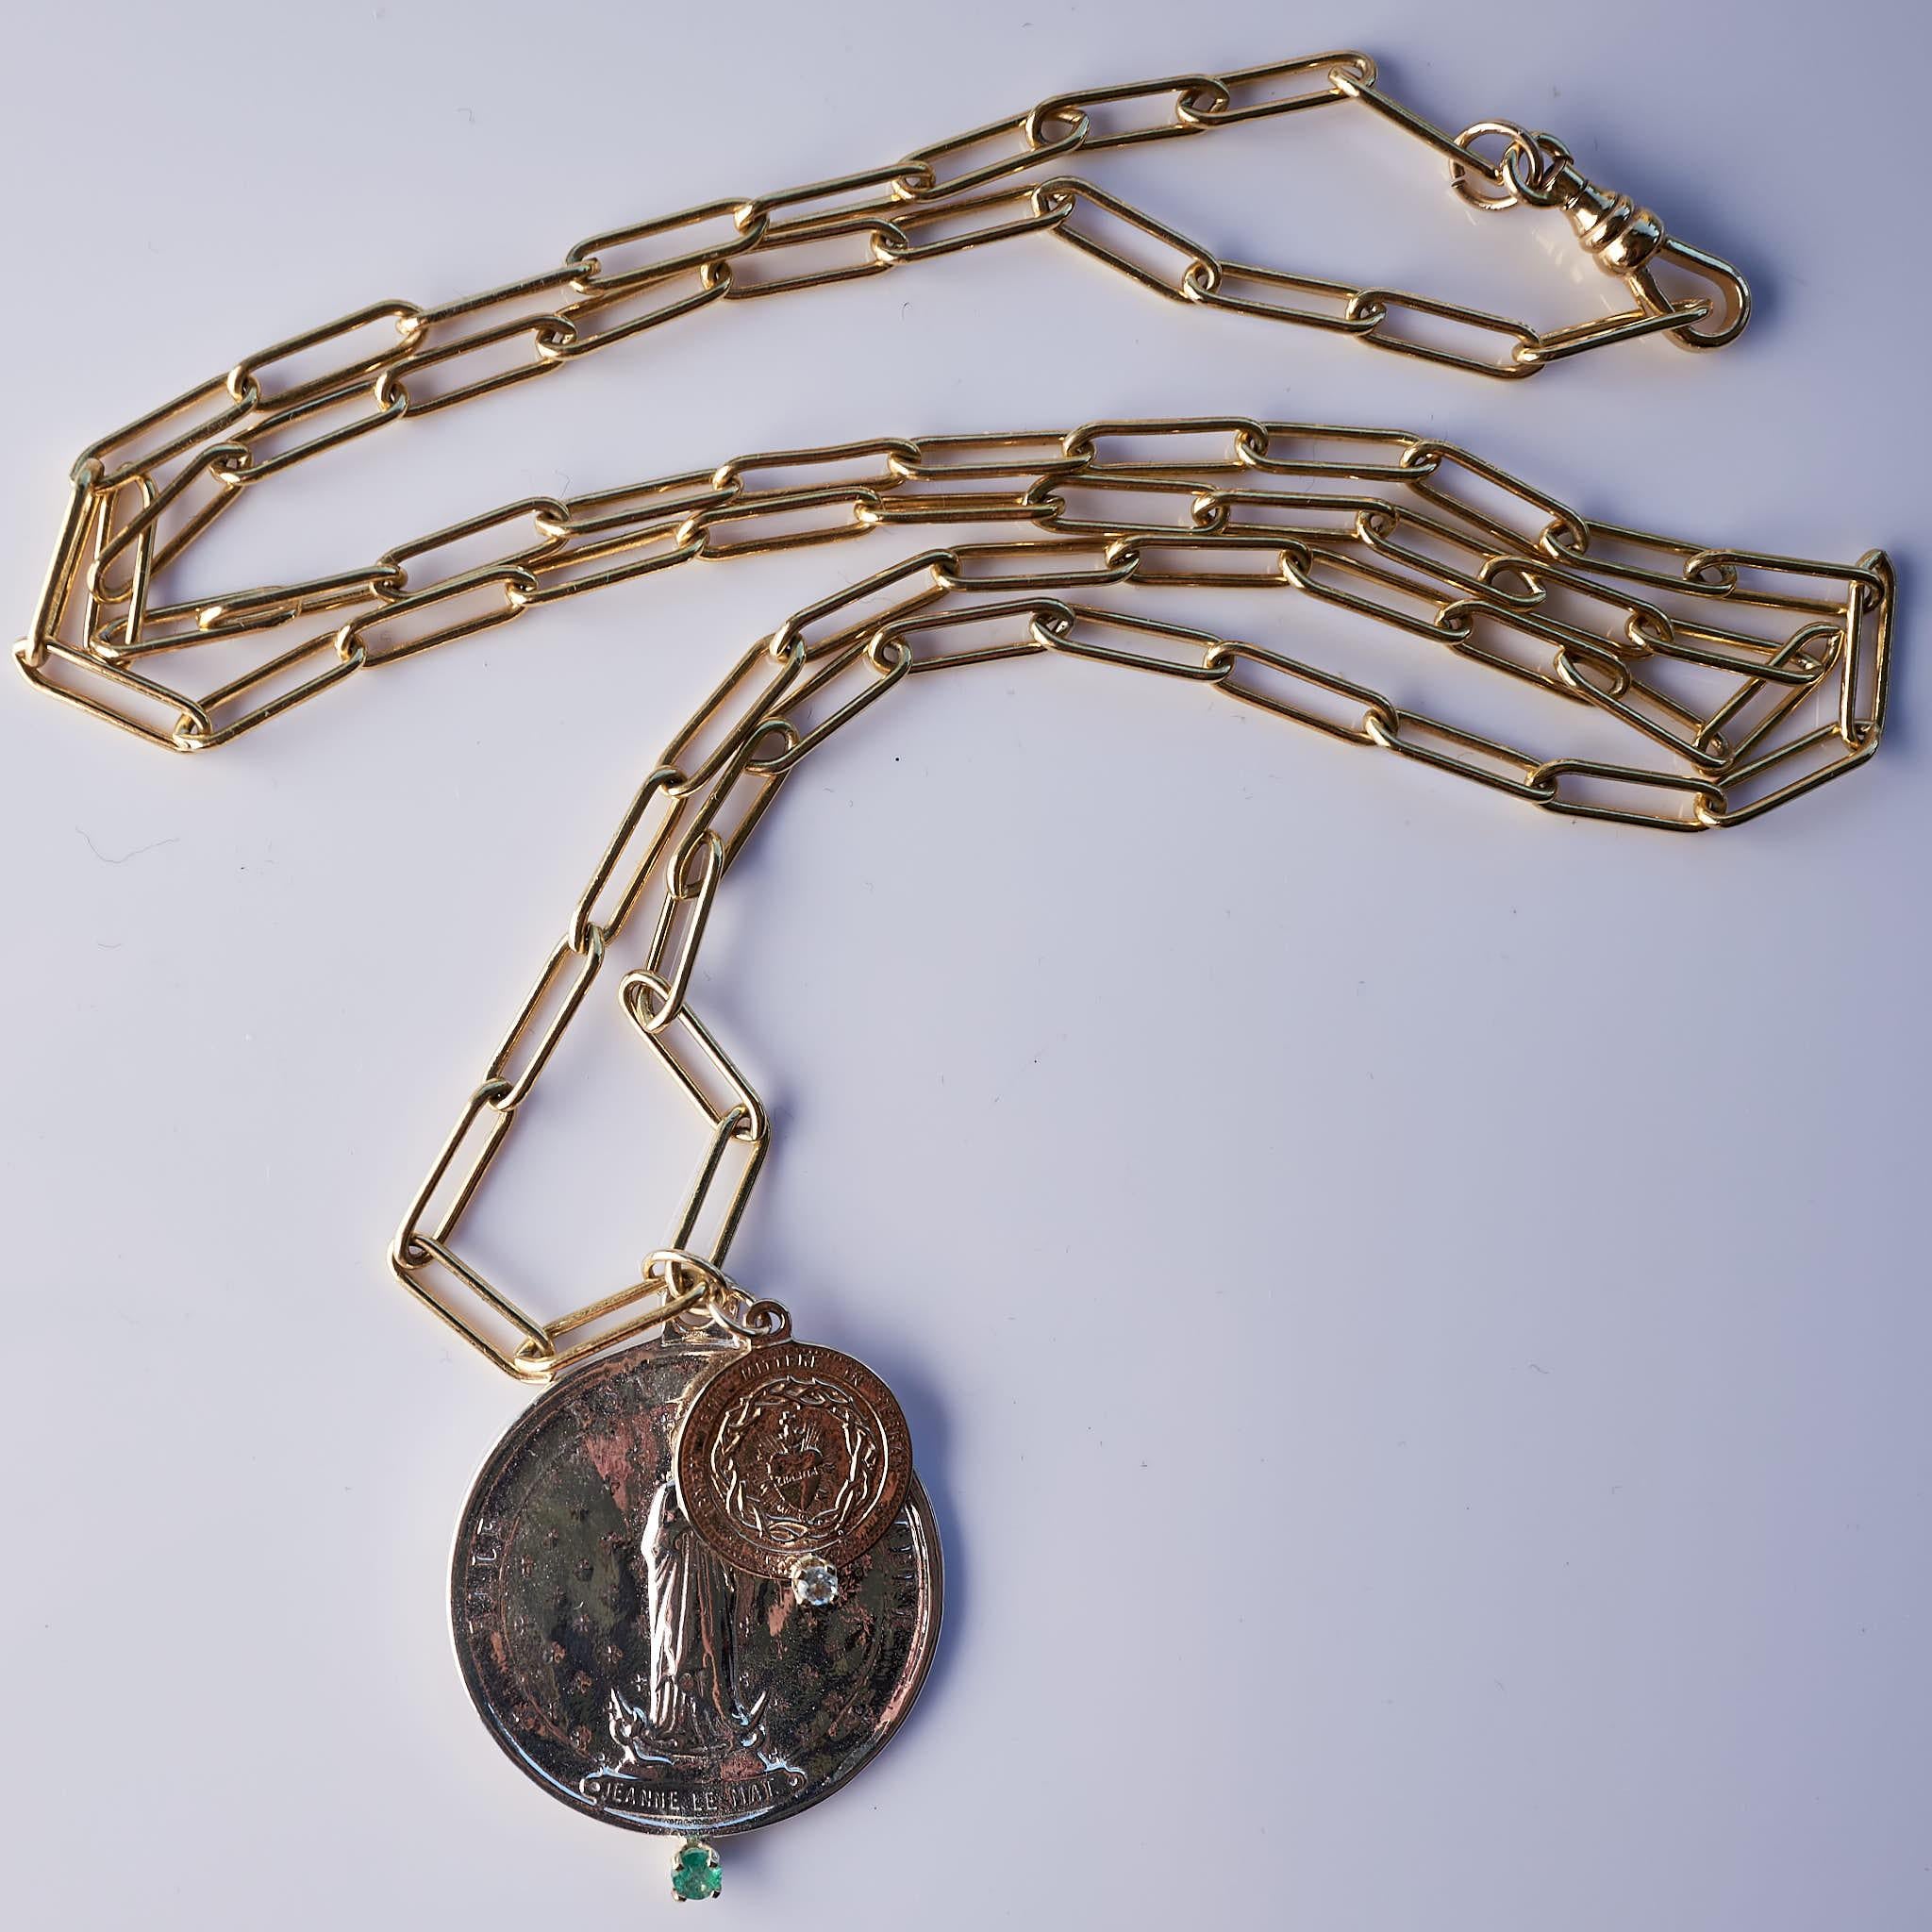 Emerald and Aquamarine Set in Gold Prongs on a Silver and Bronze Medal, One Medal is in Silver and is a French Saint, the other medal is a sacred heart in bronze with aquamarine. The Chunky Chain is a Gold Filled Necklace 28